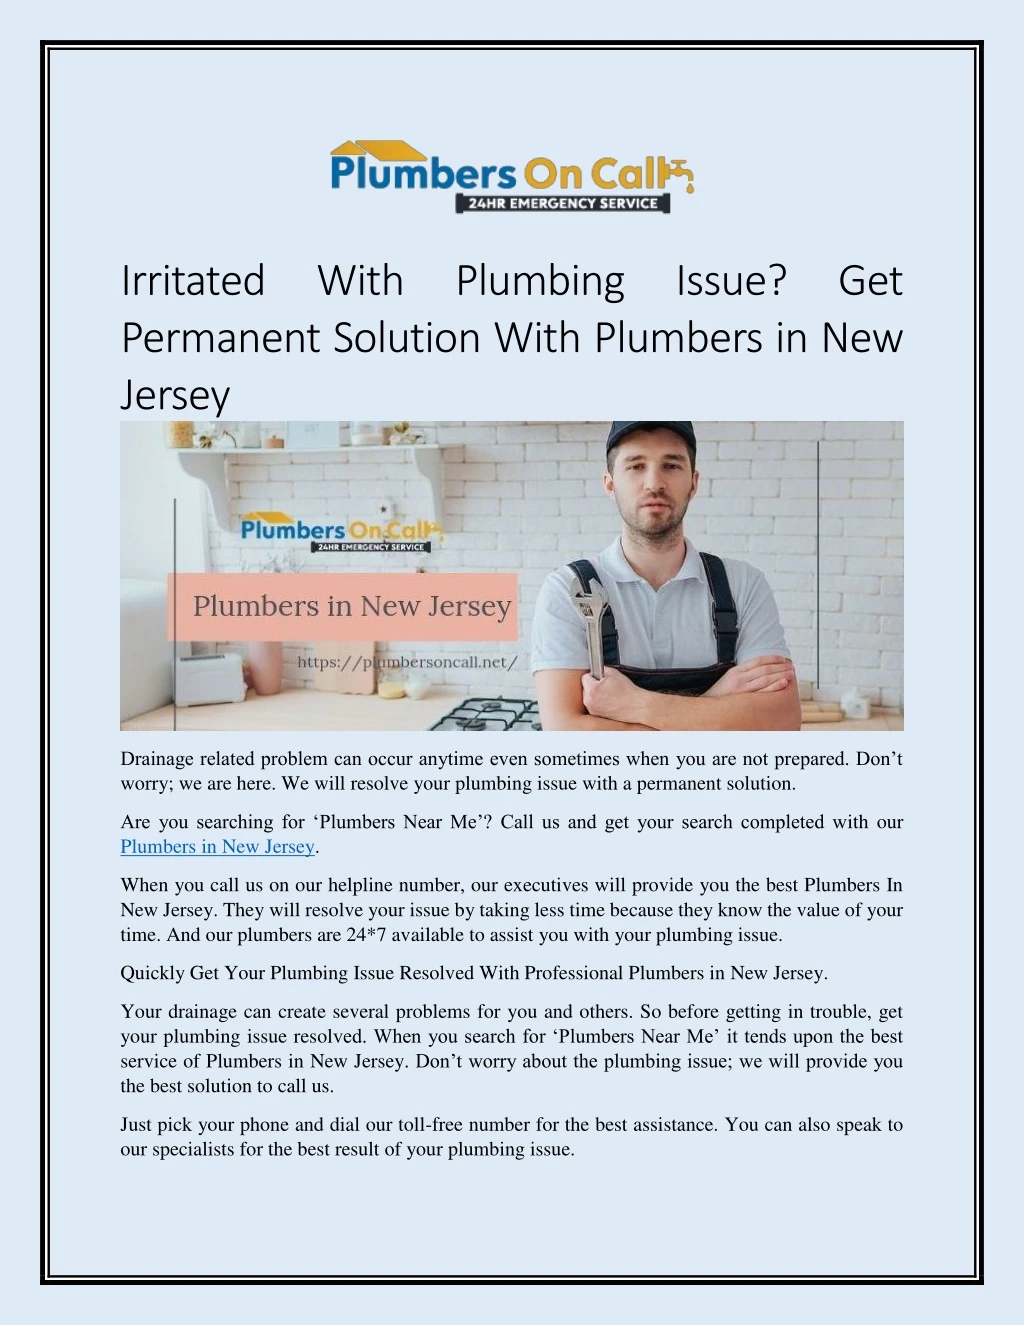 irritated with plumbing issue get permanent